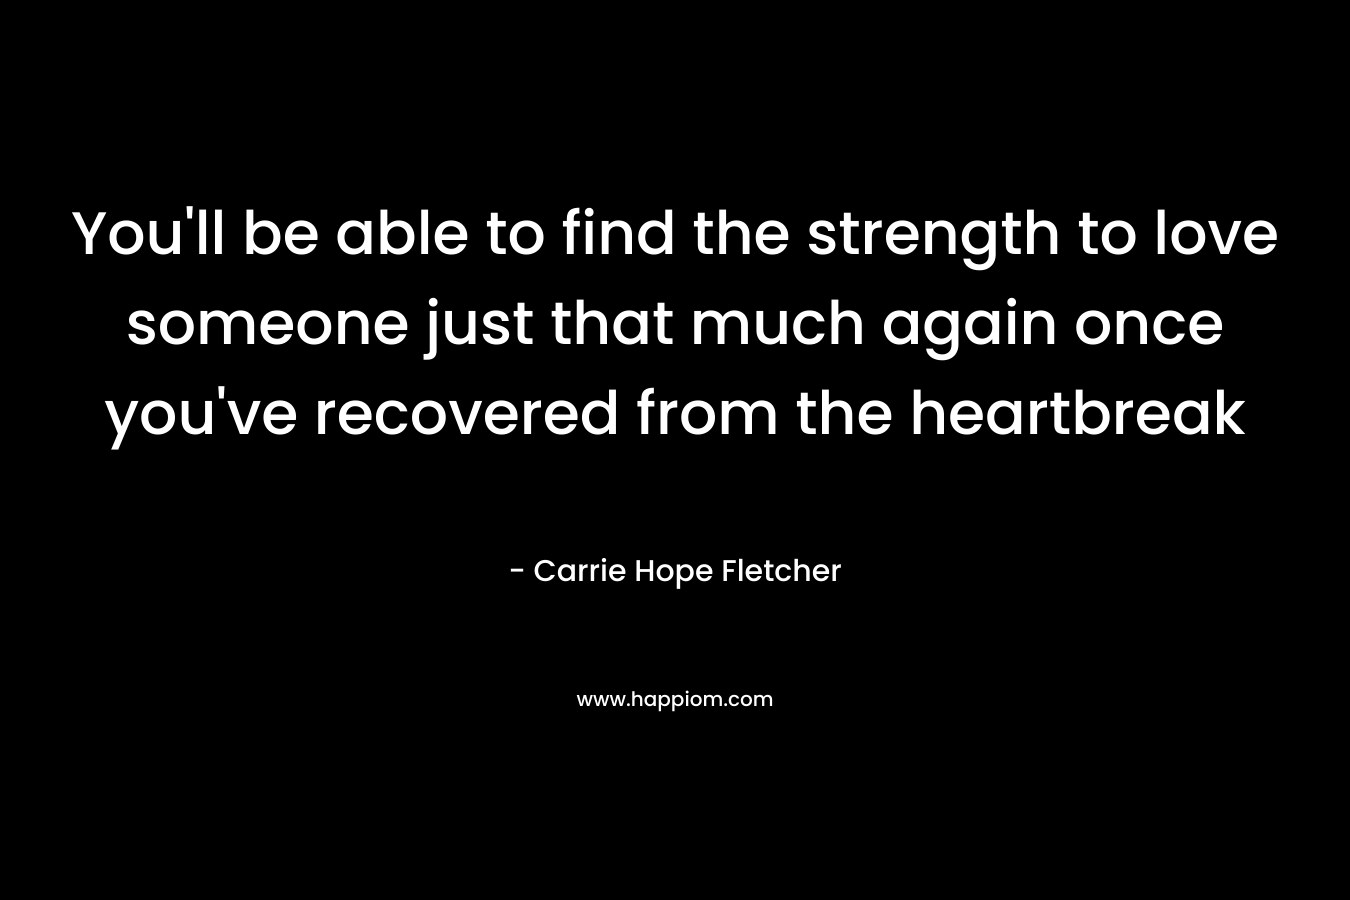 You'll be able to find the strength to love someone just that much again once you've recovered from the heartbreak